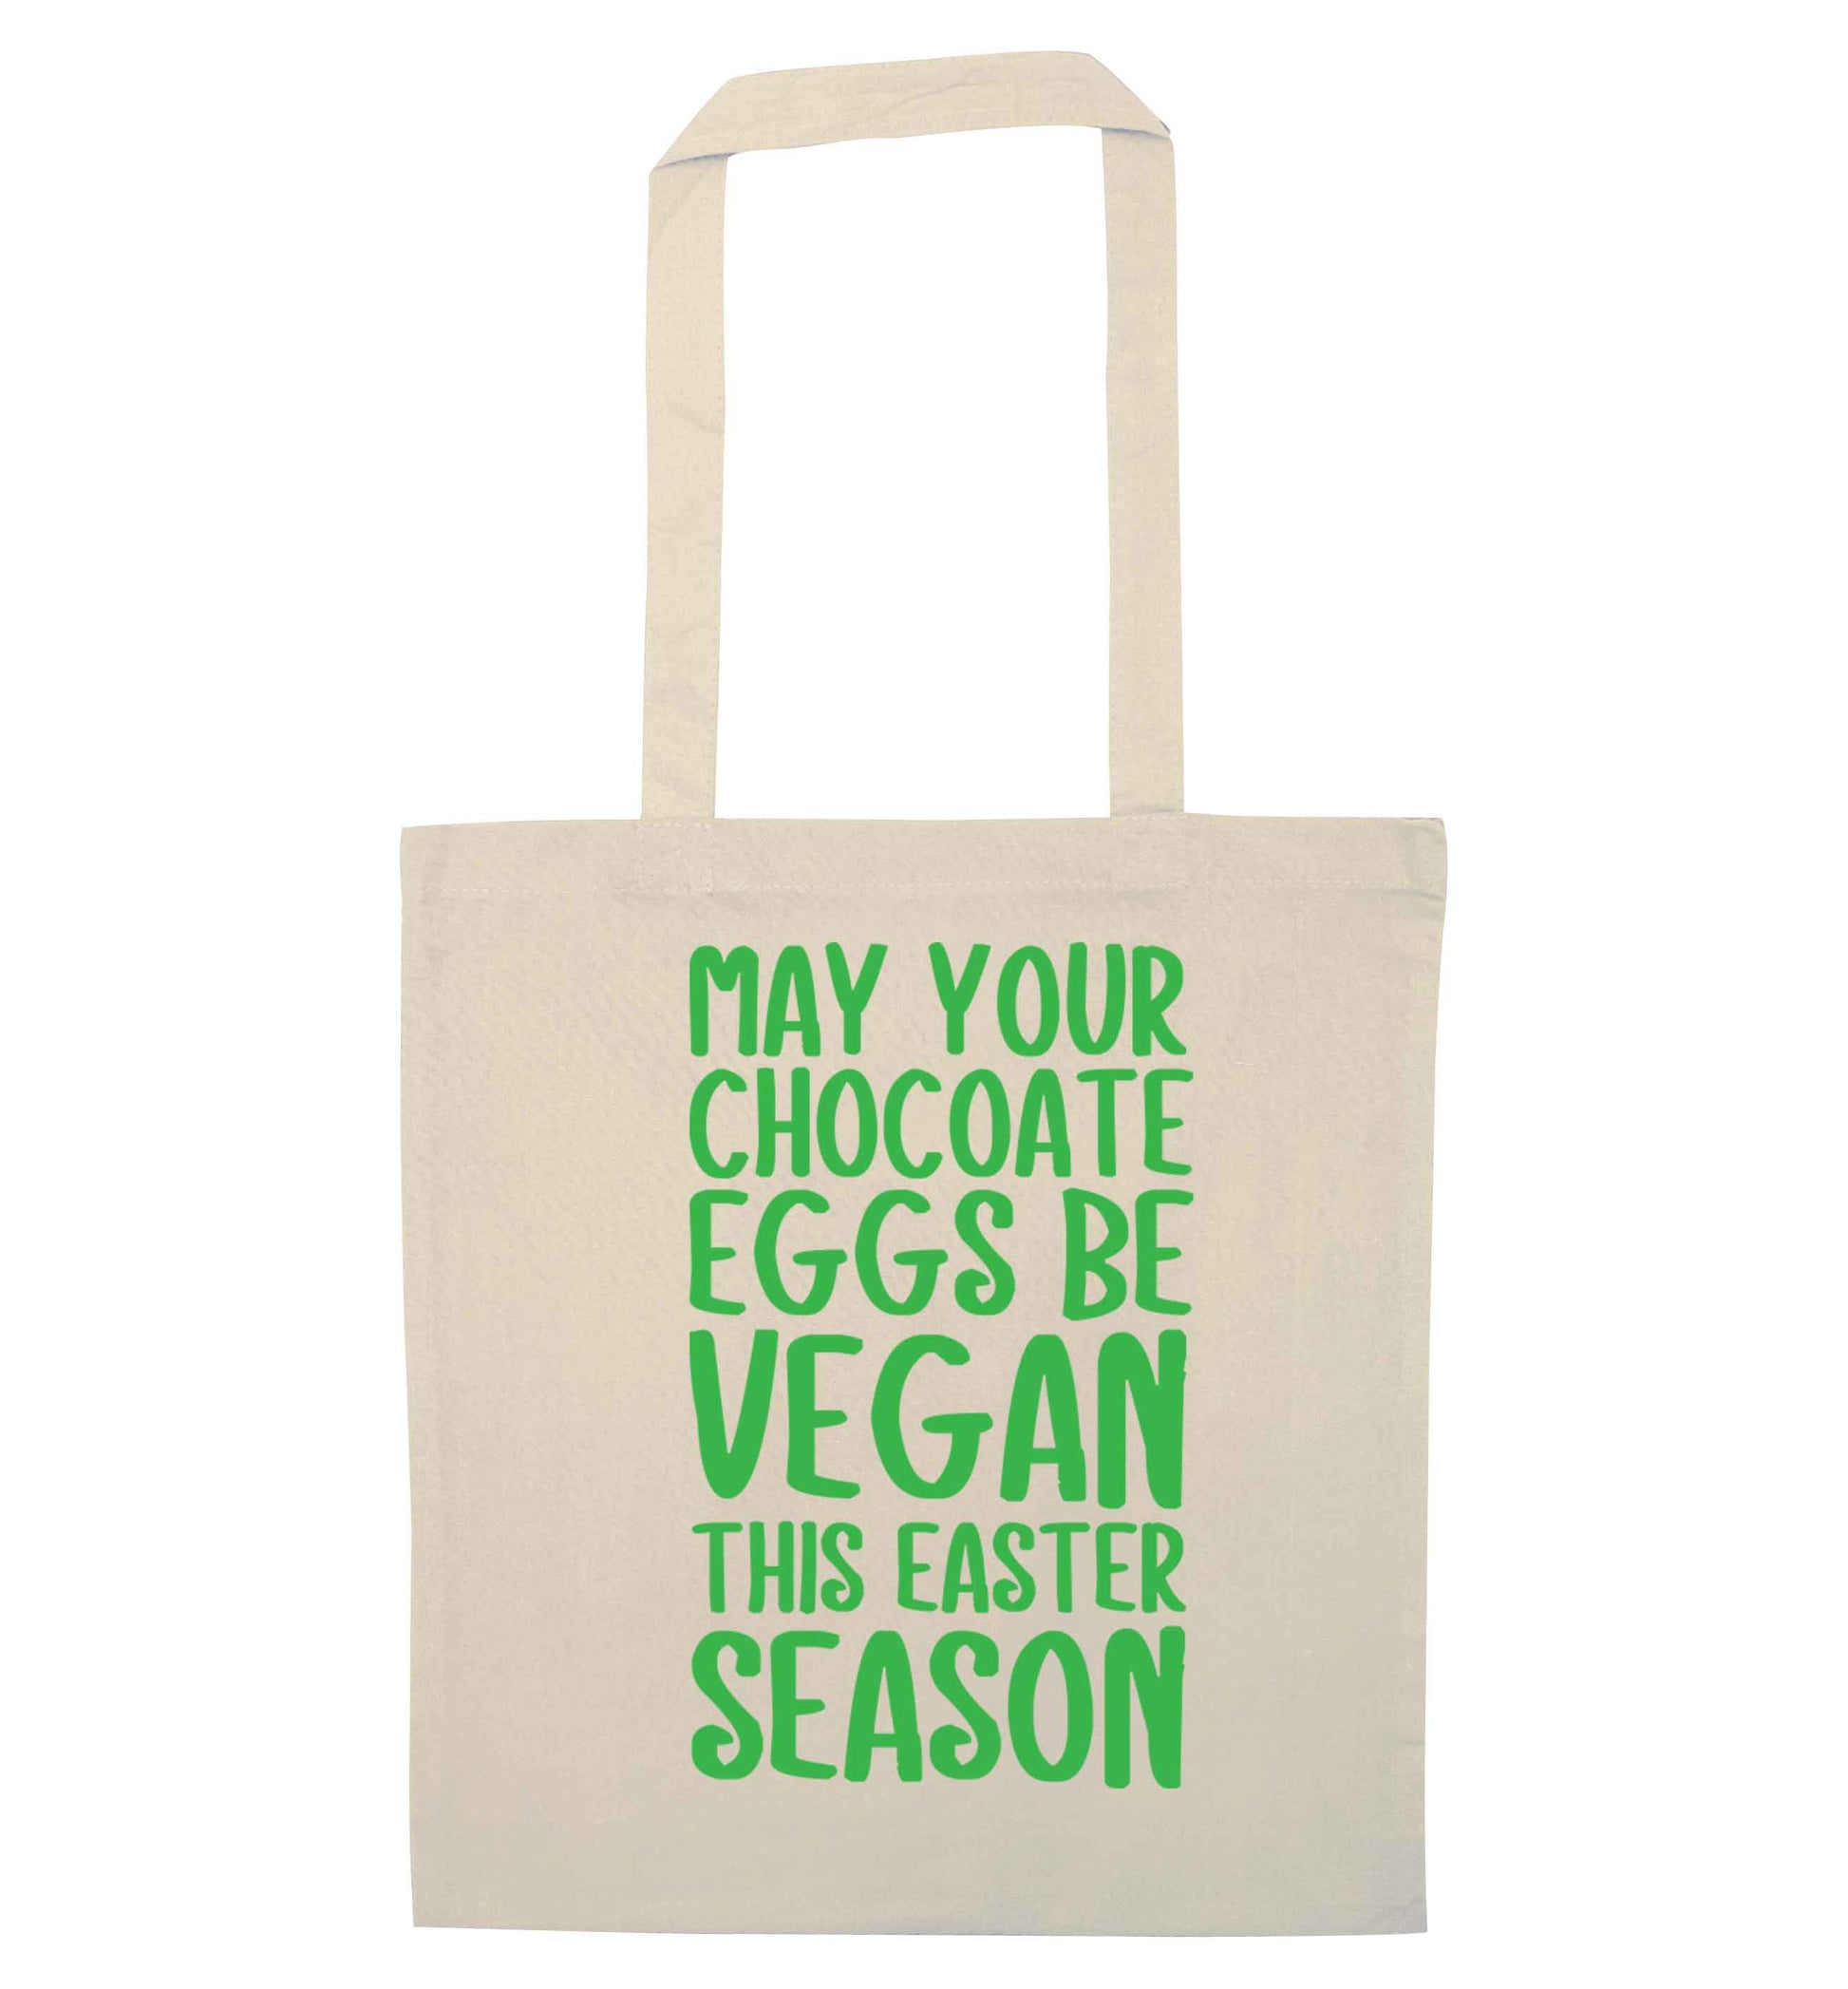 Easter bunny approved! Vegans will love this easter themed natural tote bag